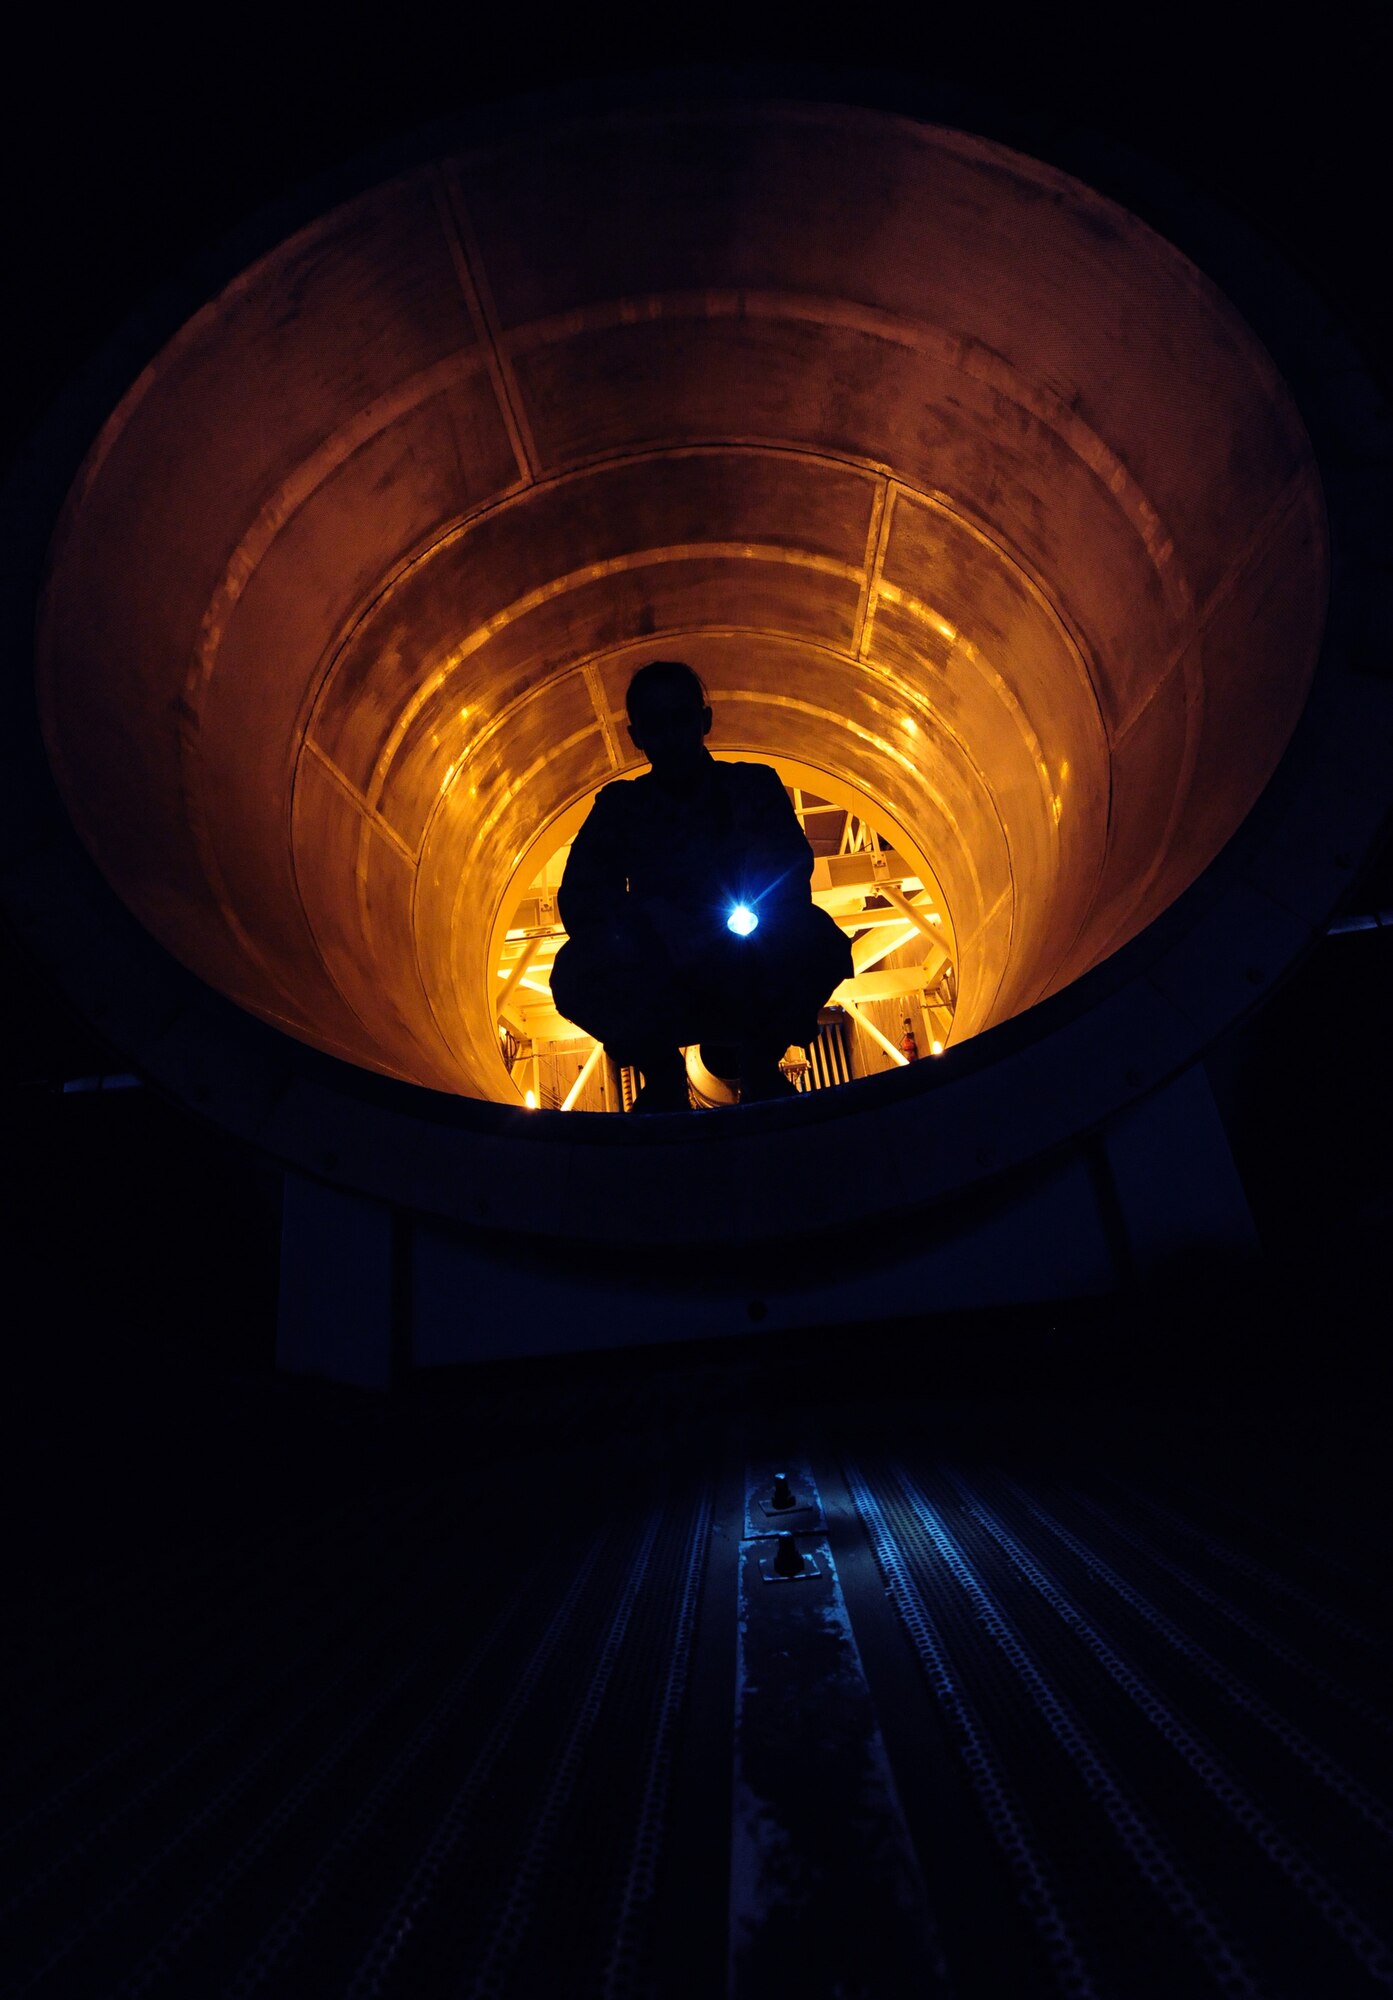 WHITEMAN AIR FORCE BASE, Mo. -- Senior Airman Kaitlyn Fawber, 509th Maintenance Squadron aerospace propulsion journeyman, shines a flash light on a test cell exhaust tube rivet, Feb. 13. The rivet maintains the sound-proofing in the cell. (U.S. Air Force photo/Staff Sgt. Nick Wilson) (Released)